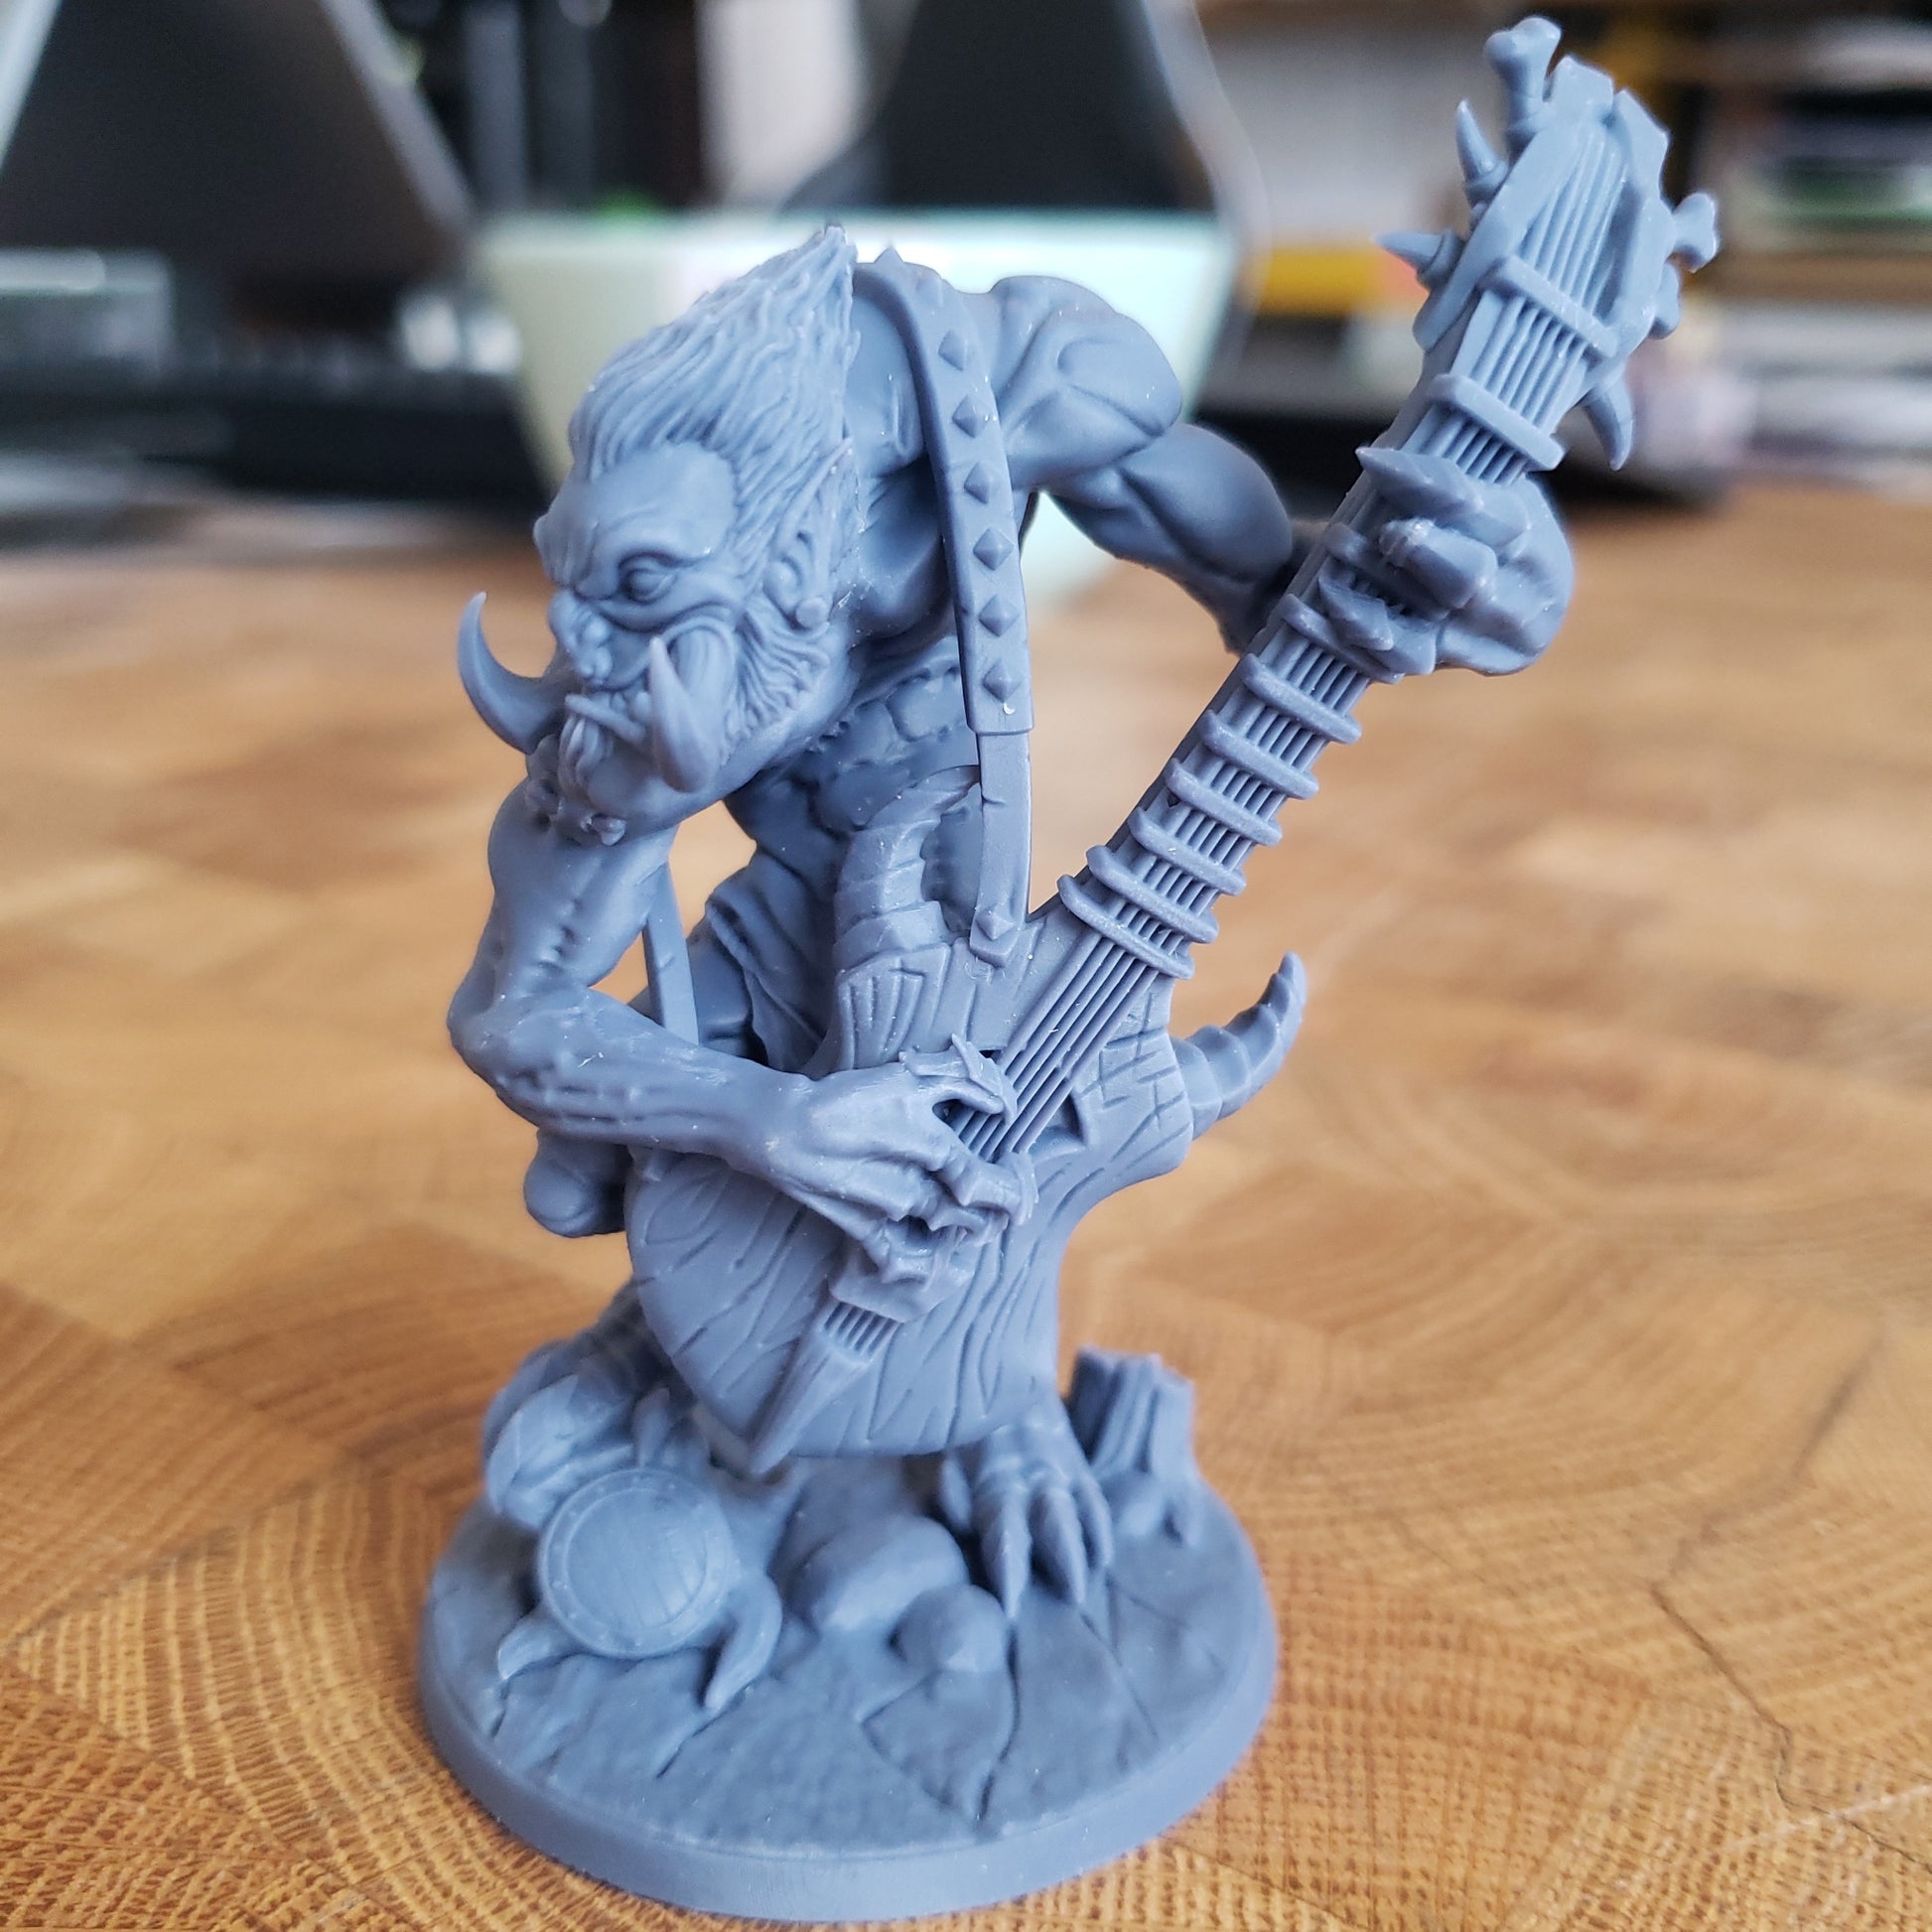 Image shows an example of a 3D printed troll guitarist gaming miniature printed in-house at All Systems Go